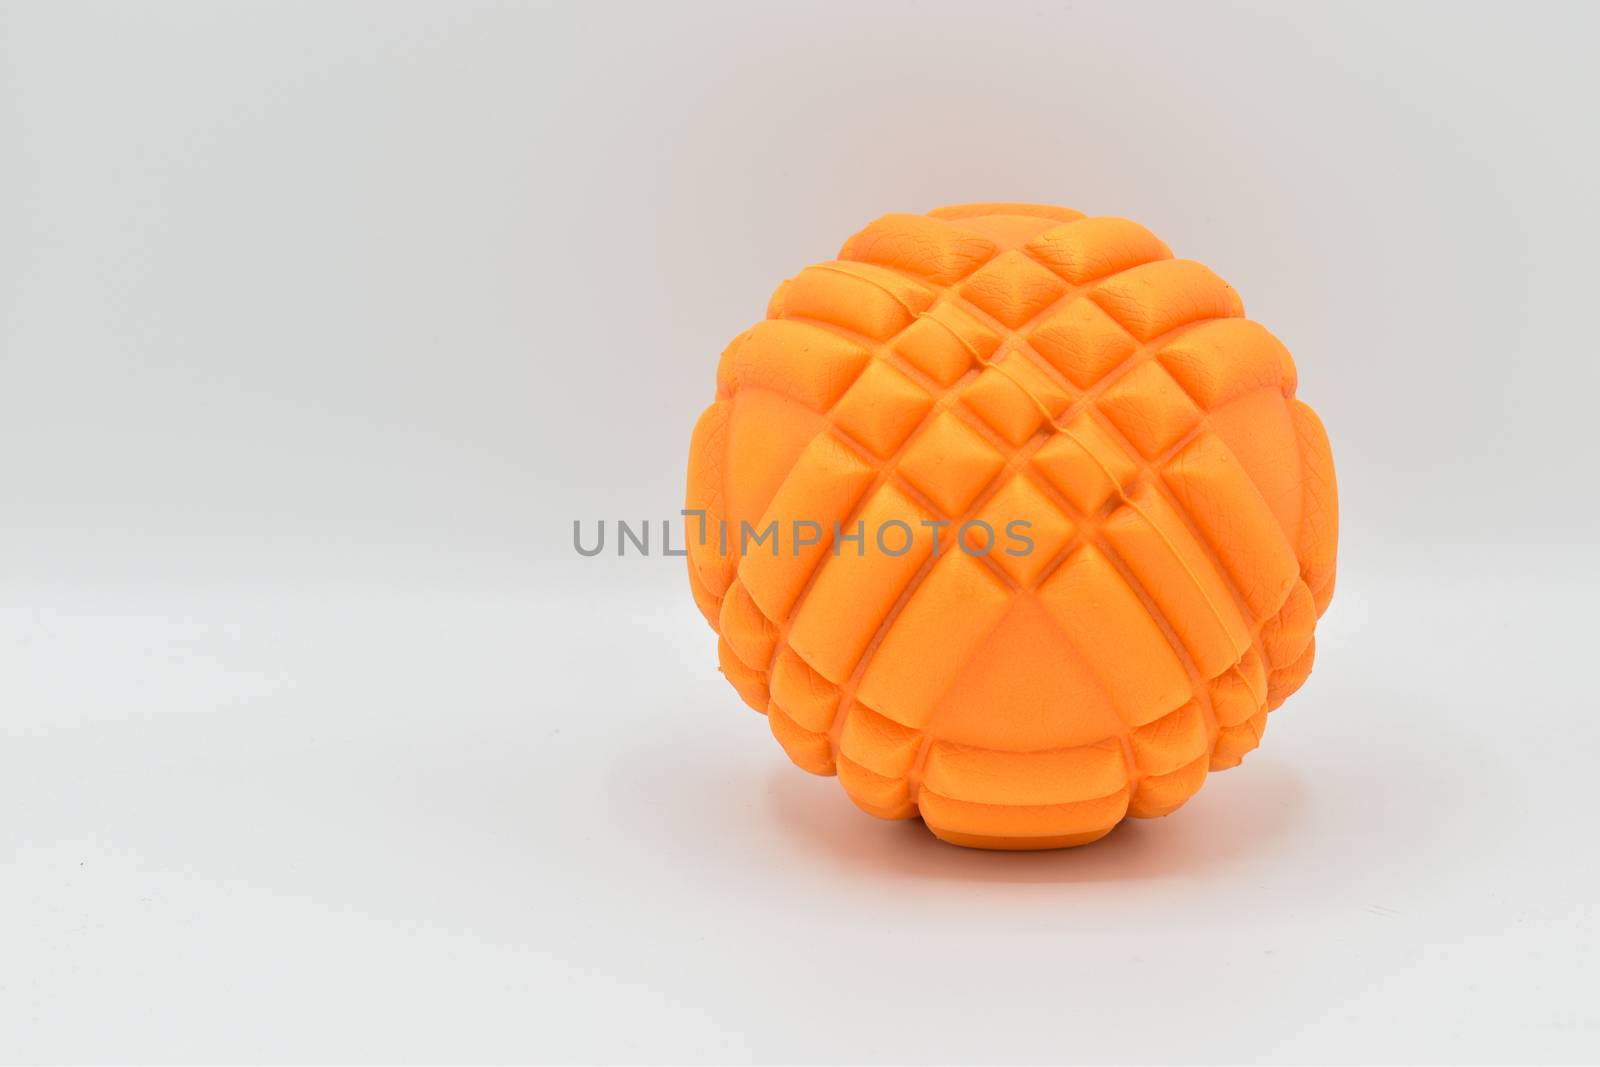 Foam roller ball isolated on white background